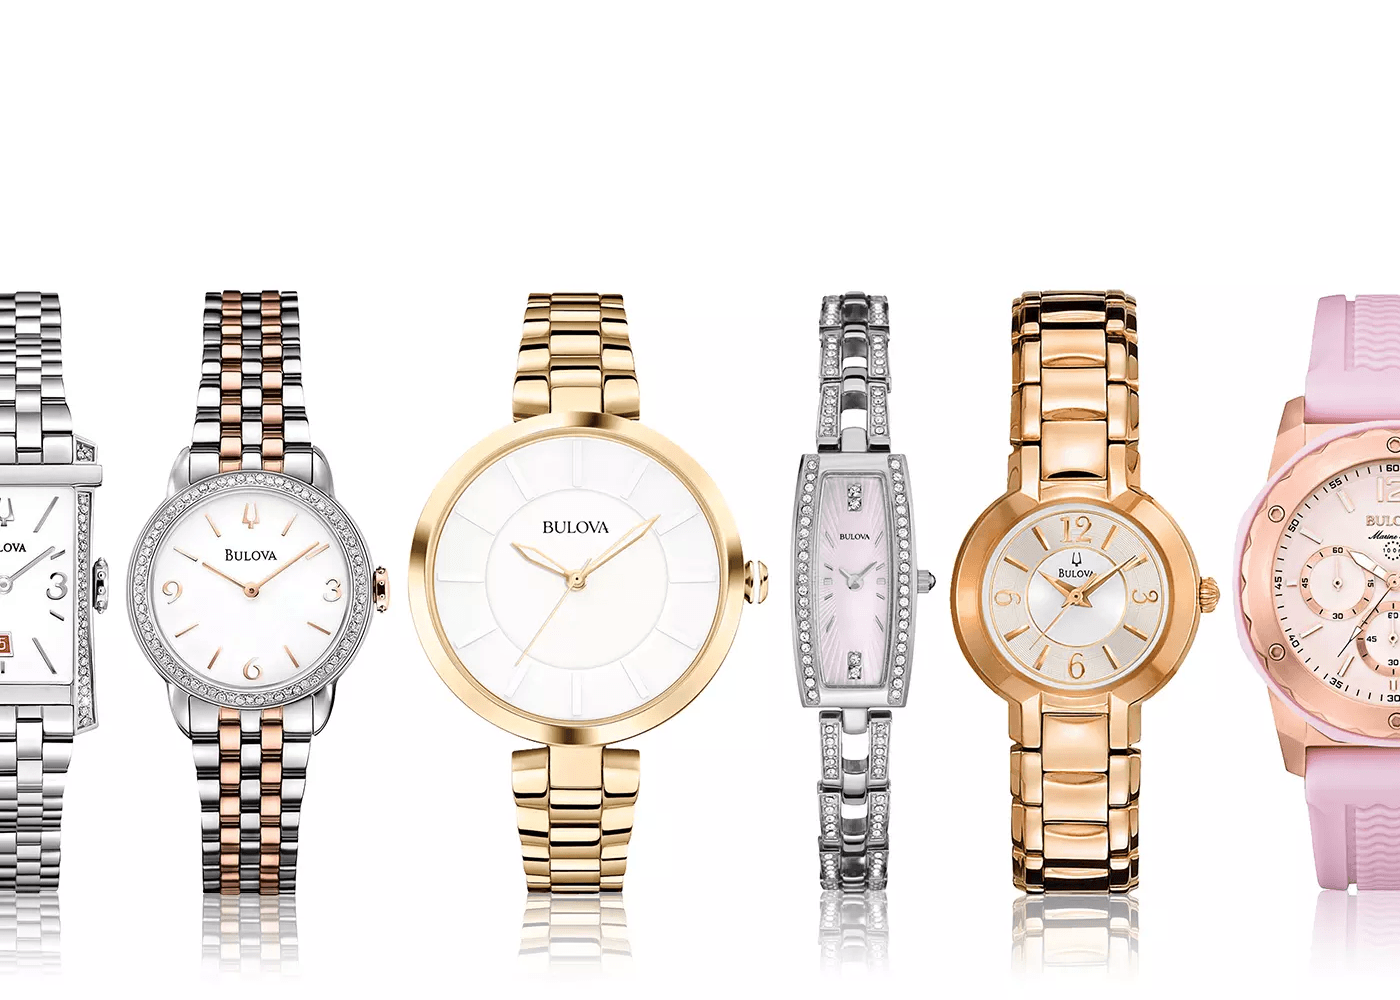 Teachers and students save 15% on Bulova watches.